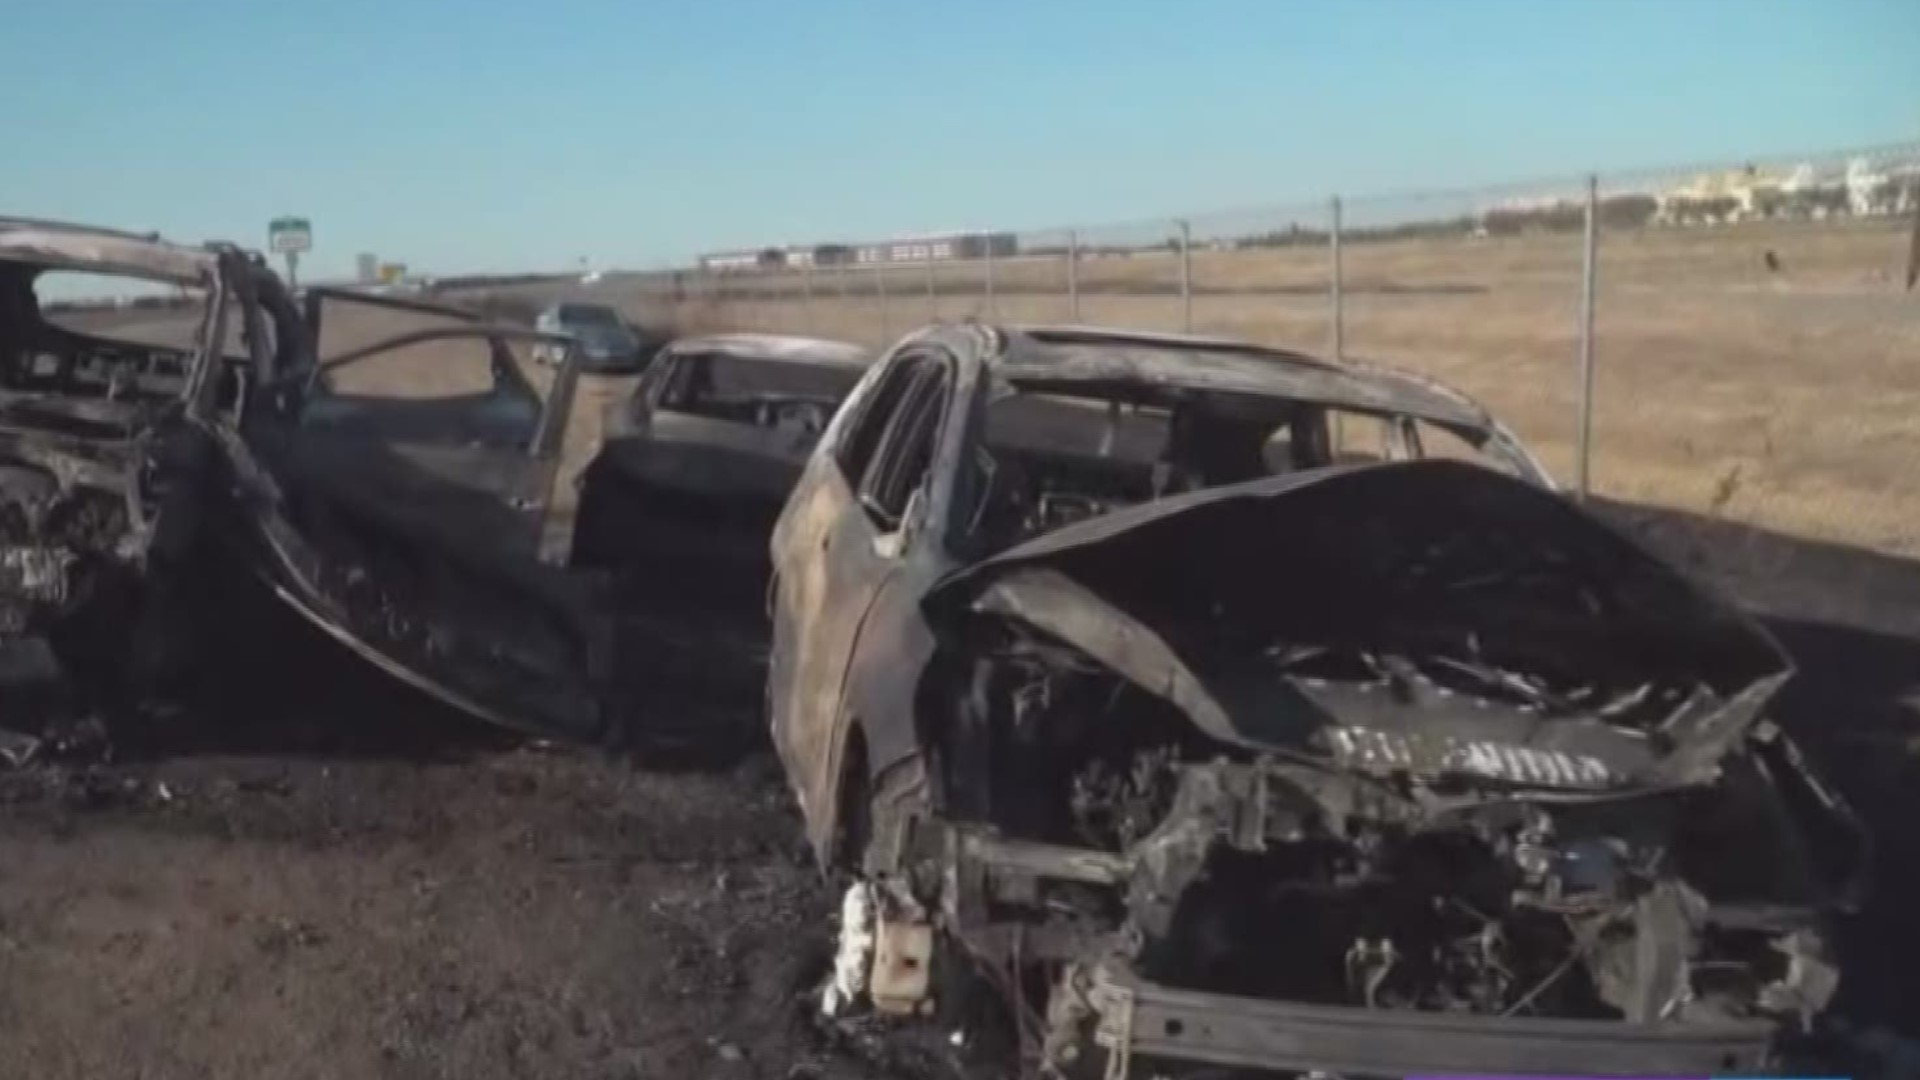 Fire destroyed several cars along I-5 in Natomas on Sunday afternoon. A brush fire shut down the freeway for several hours.